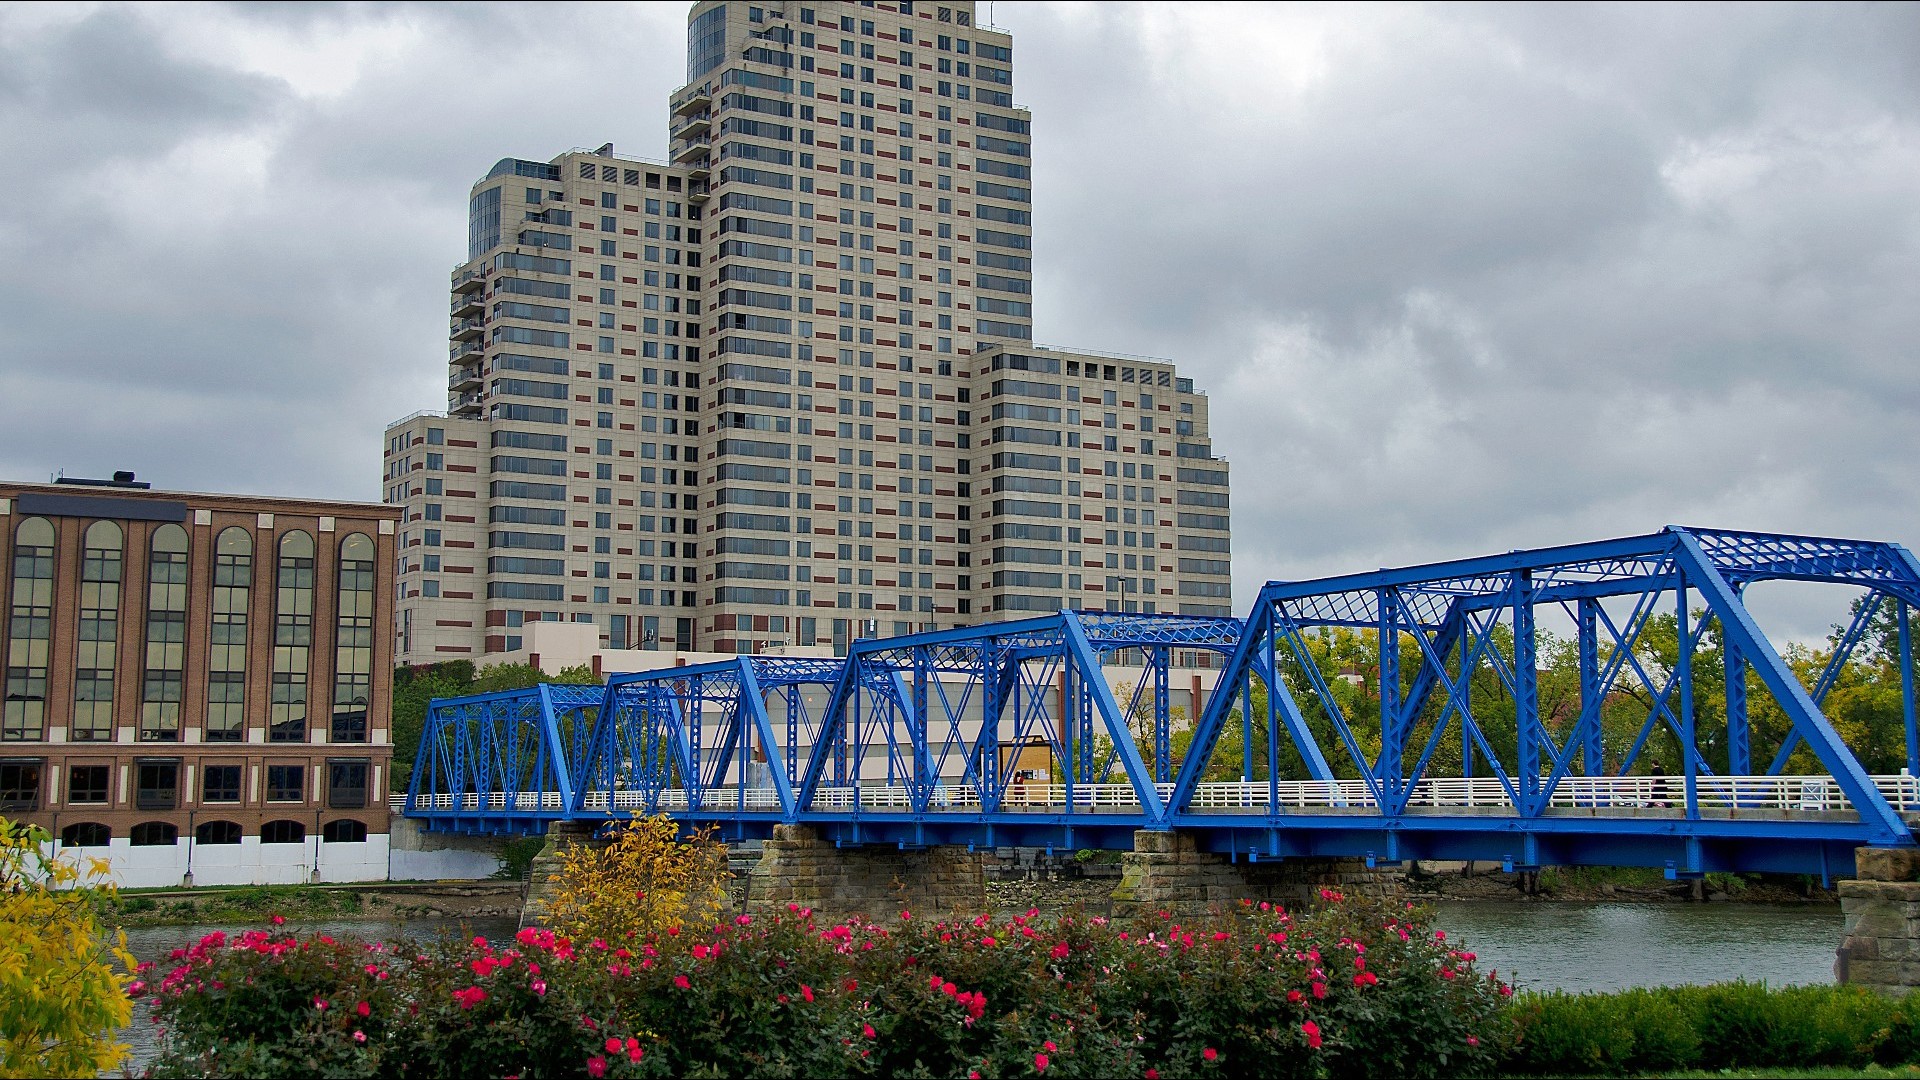 The bridge will be blocked on weekend nights until the end of ArtPrize, but officials say they're looking into keeping it closed overnight indefinitely.